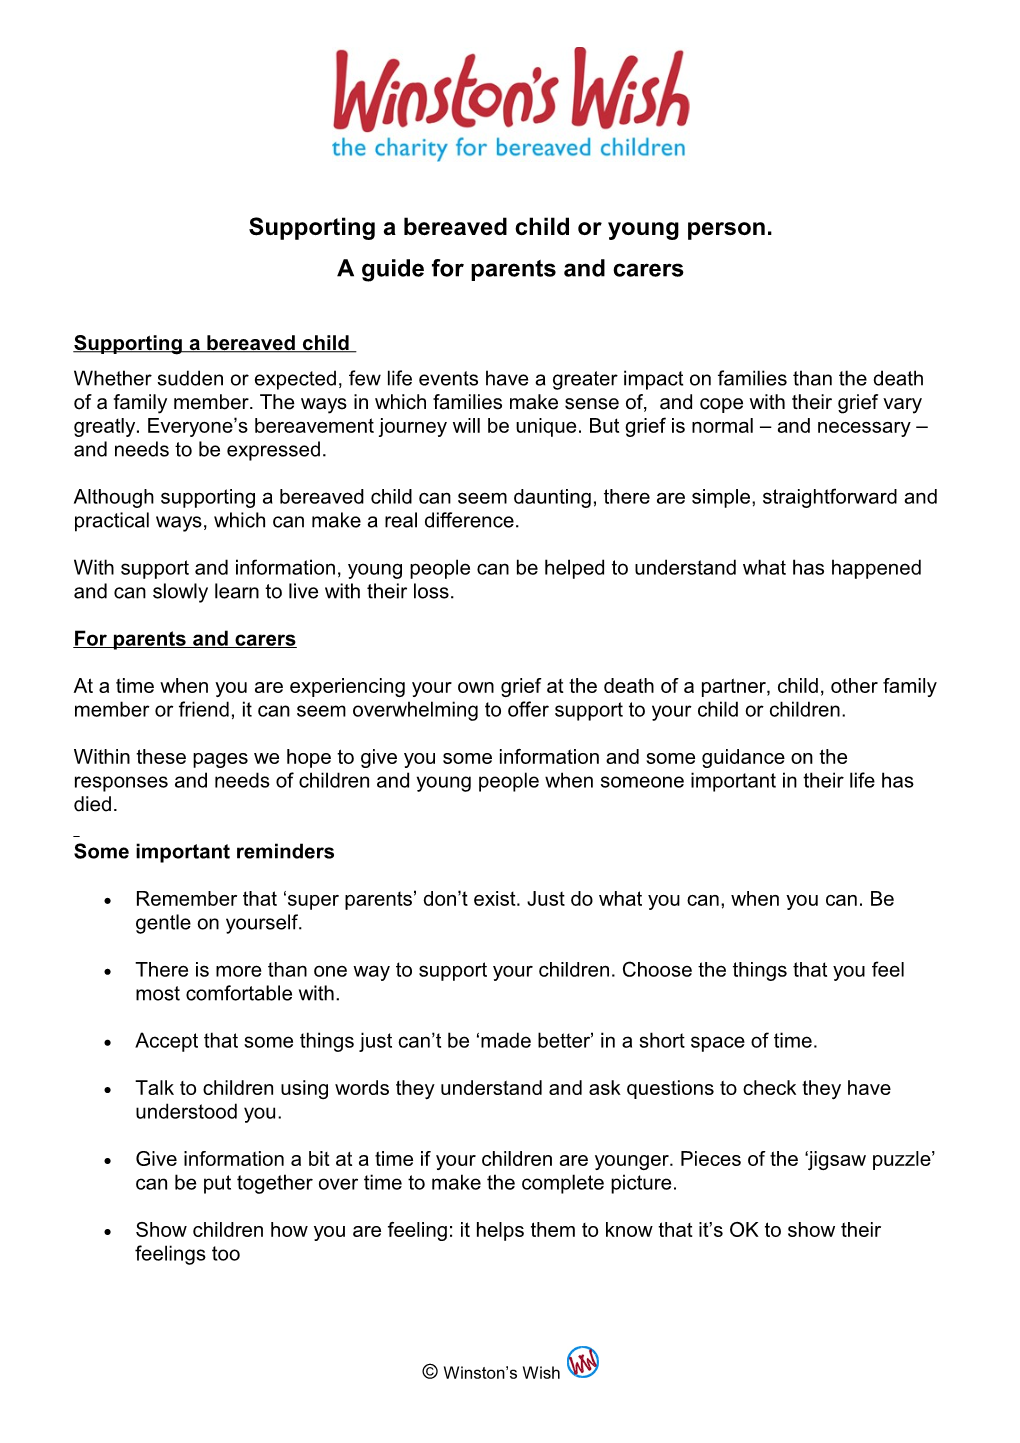 Supporting a Bereaved Child Or Young Person